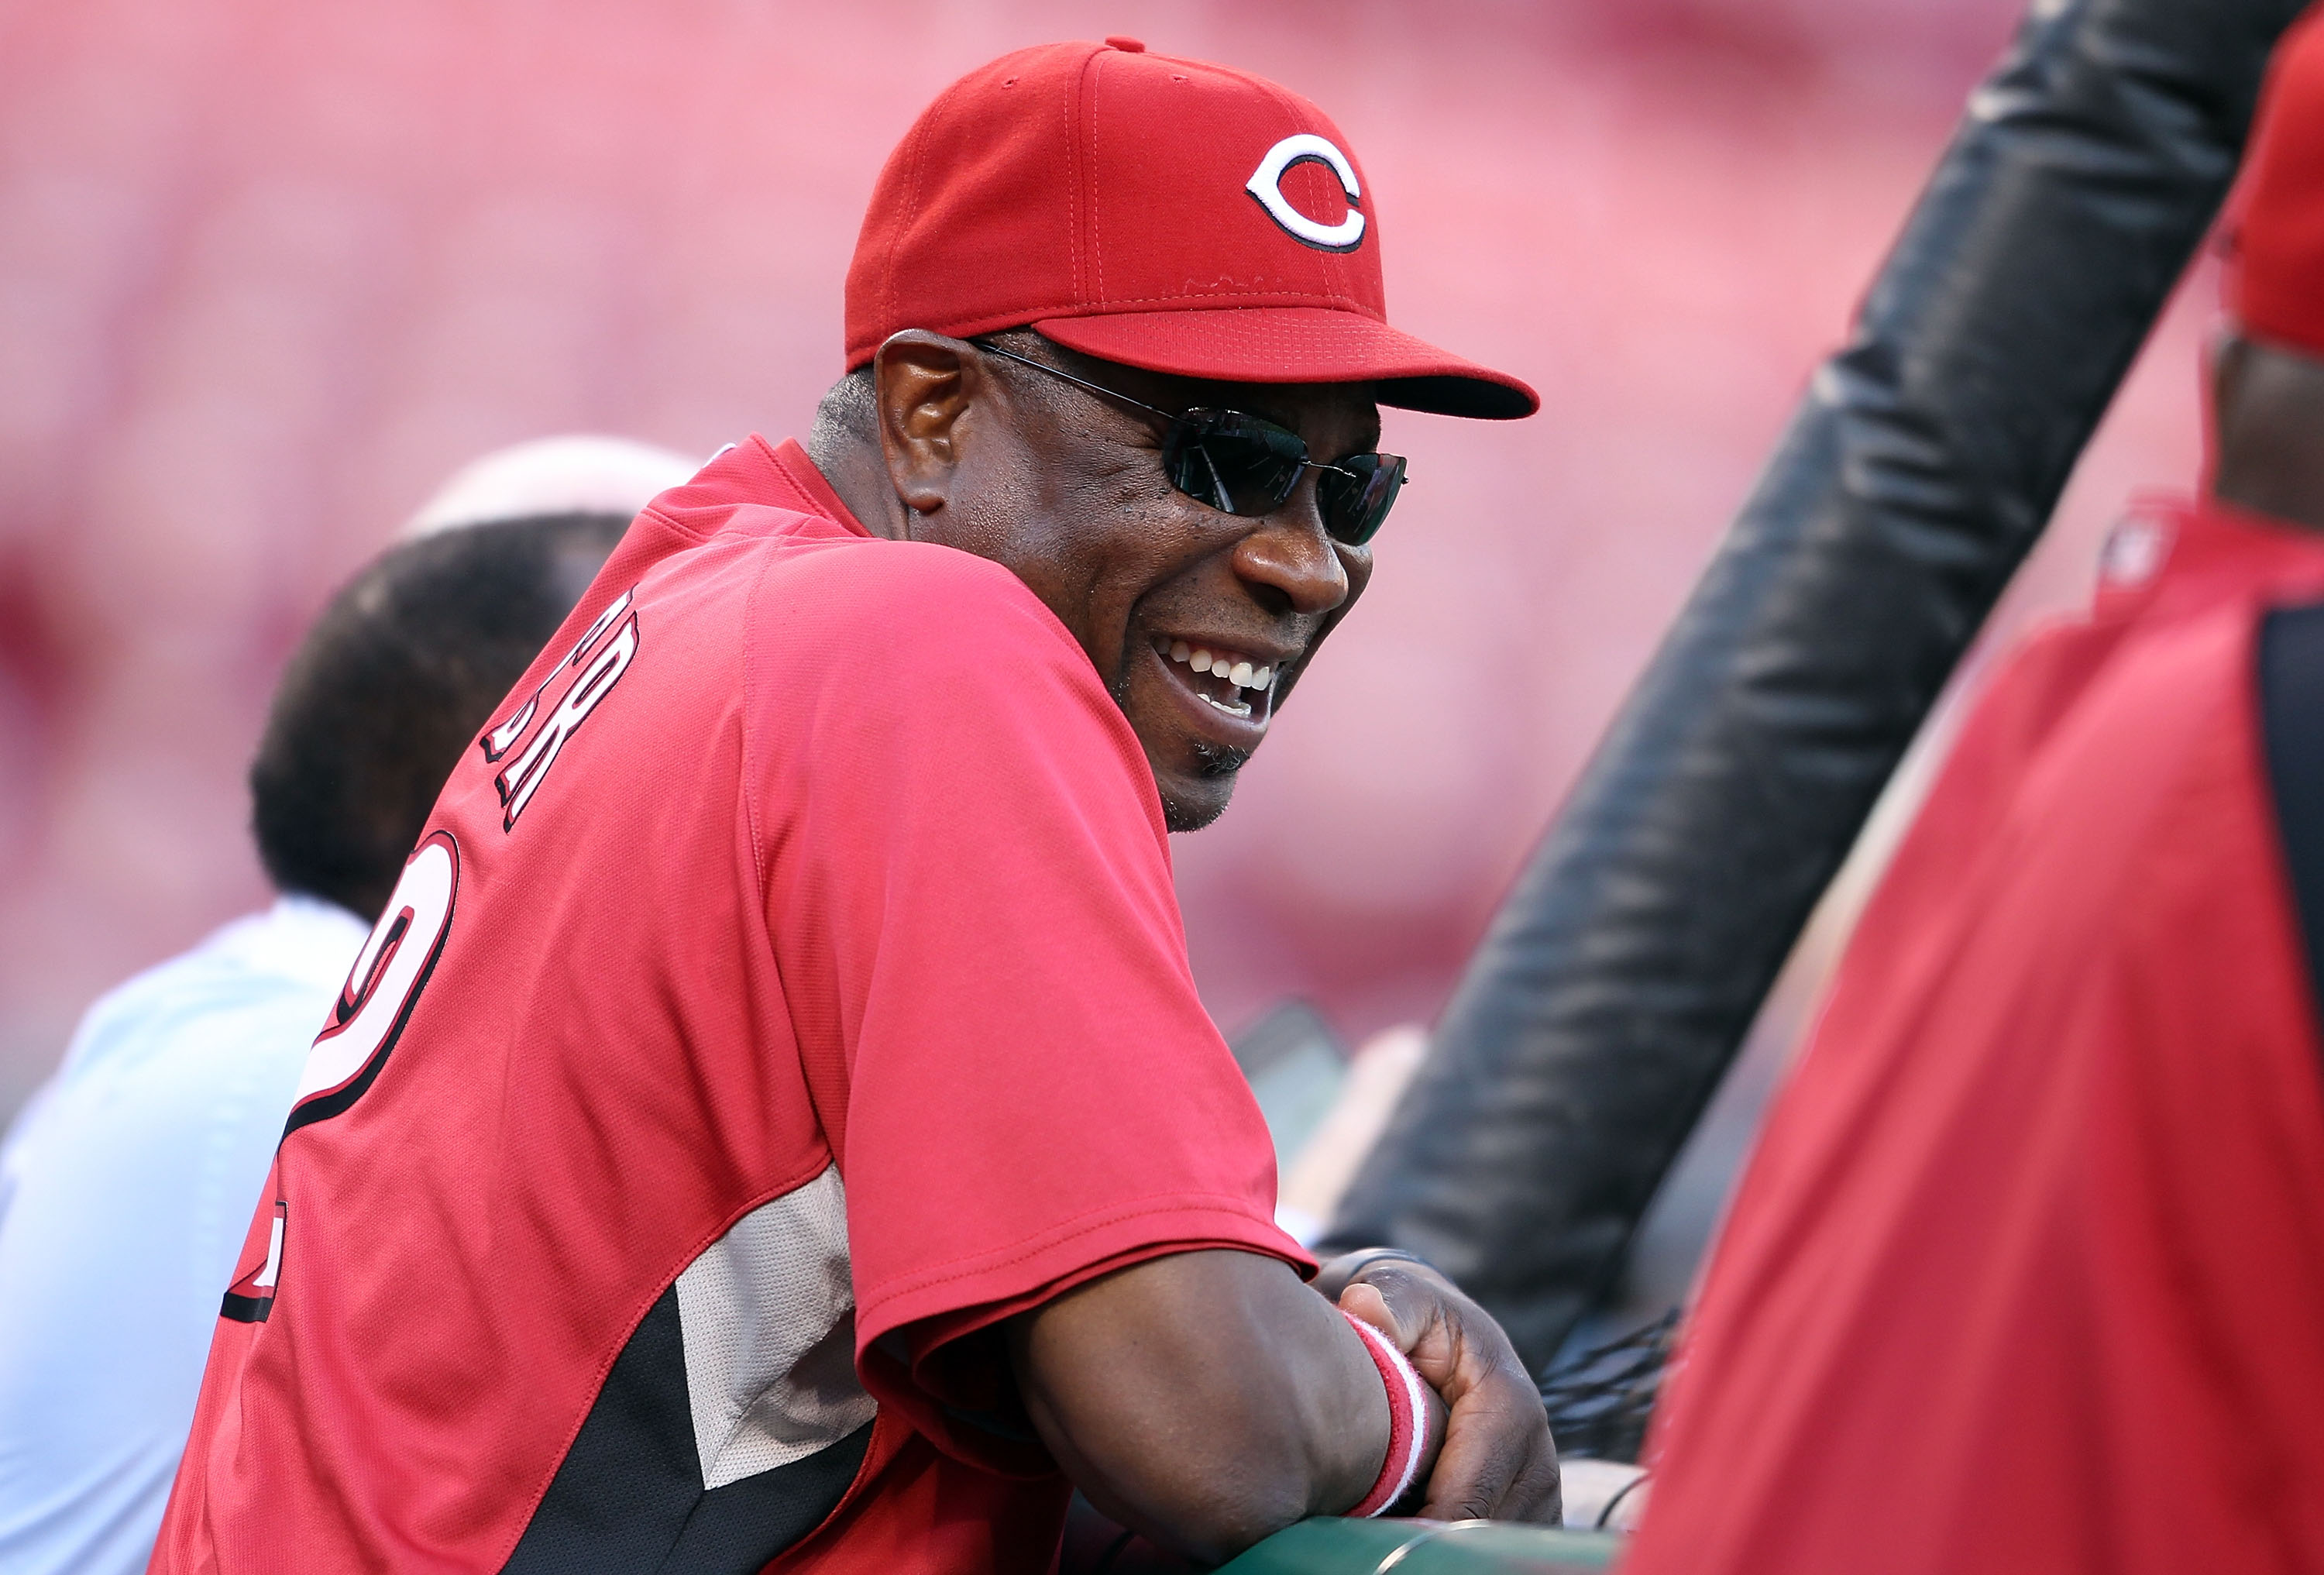 CINCINNATI - OCTOBER 10: Dusty Baker the Manager of the Cincinnati Reds takes in batting practice before the start of  Game 3 of the NLDS against the Philadelphia Phillies  at Great American Ball Park on October 10, 2010 in Cincinnati, Ohio.  (Photo by An